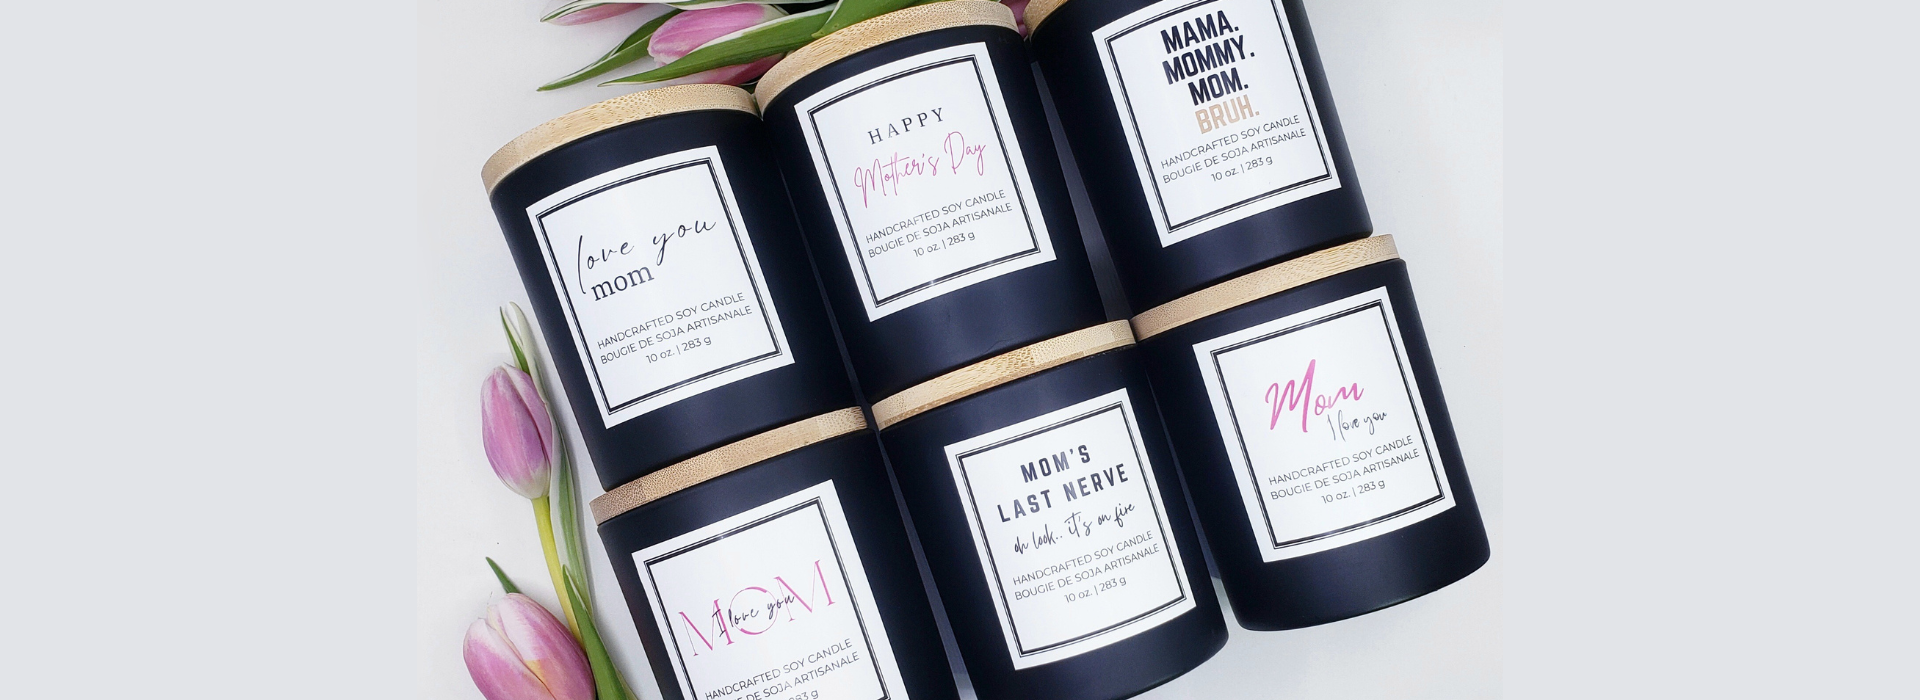 Mother's gift ideas and candles